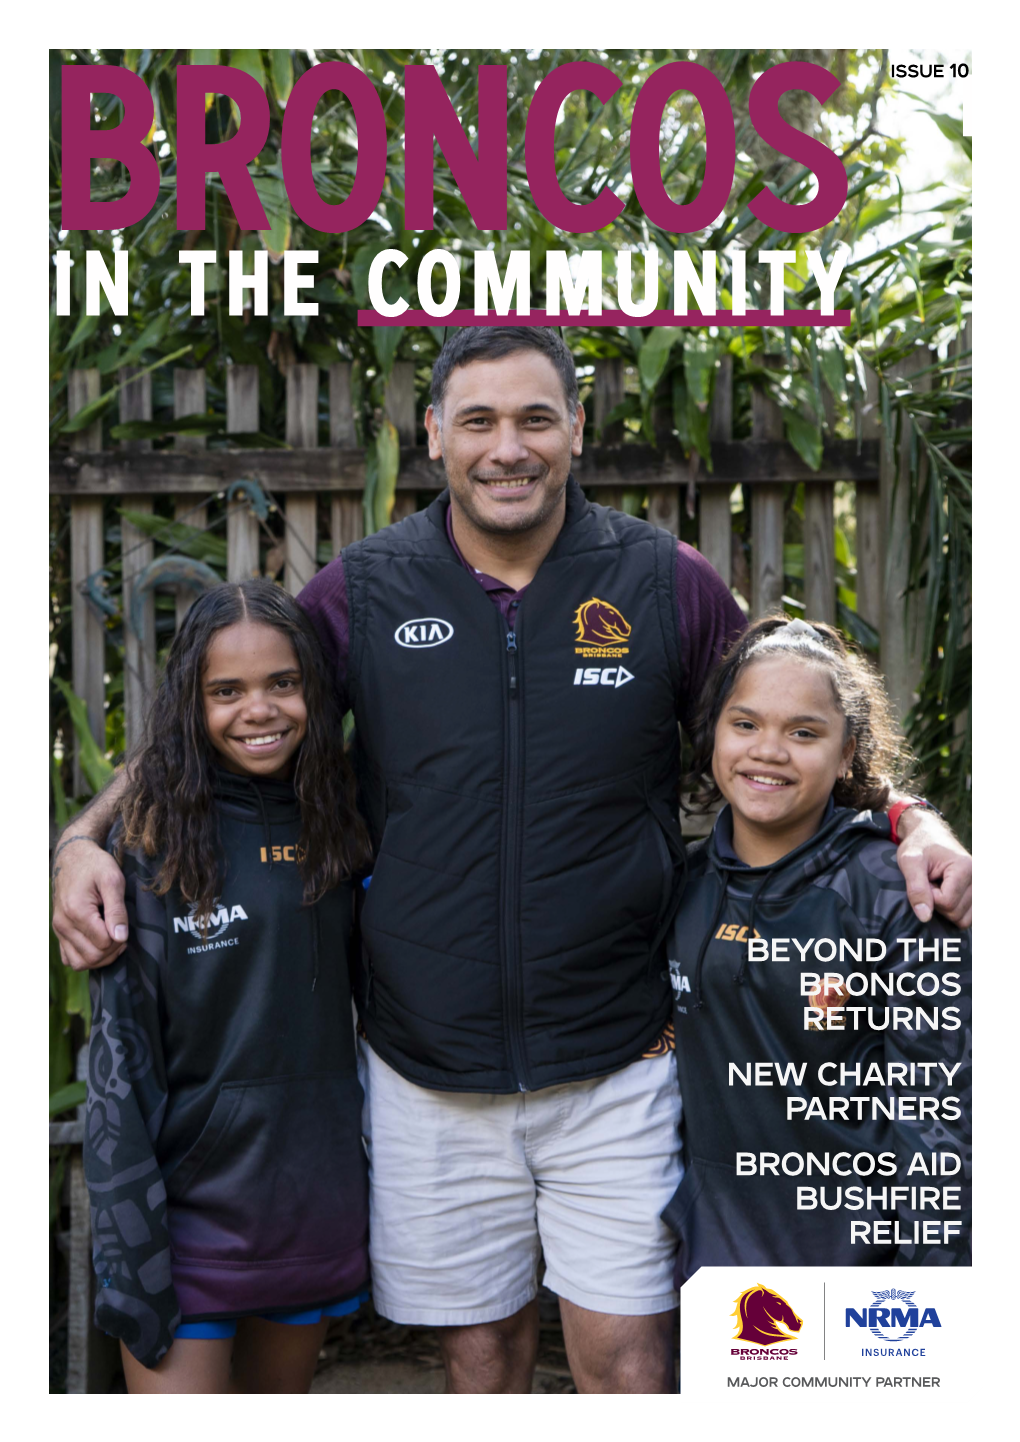 Beyond the Broncos Returns New Charity Partners Broncos Aid Bushfire Relief Charity Partners